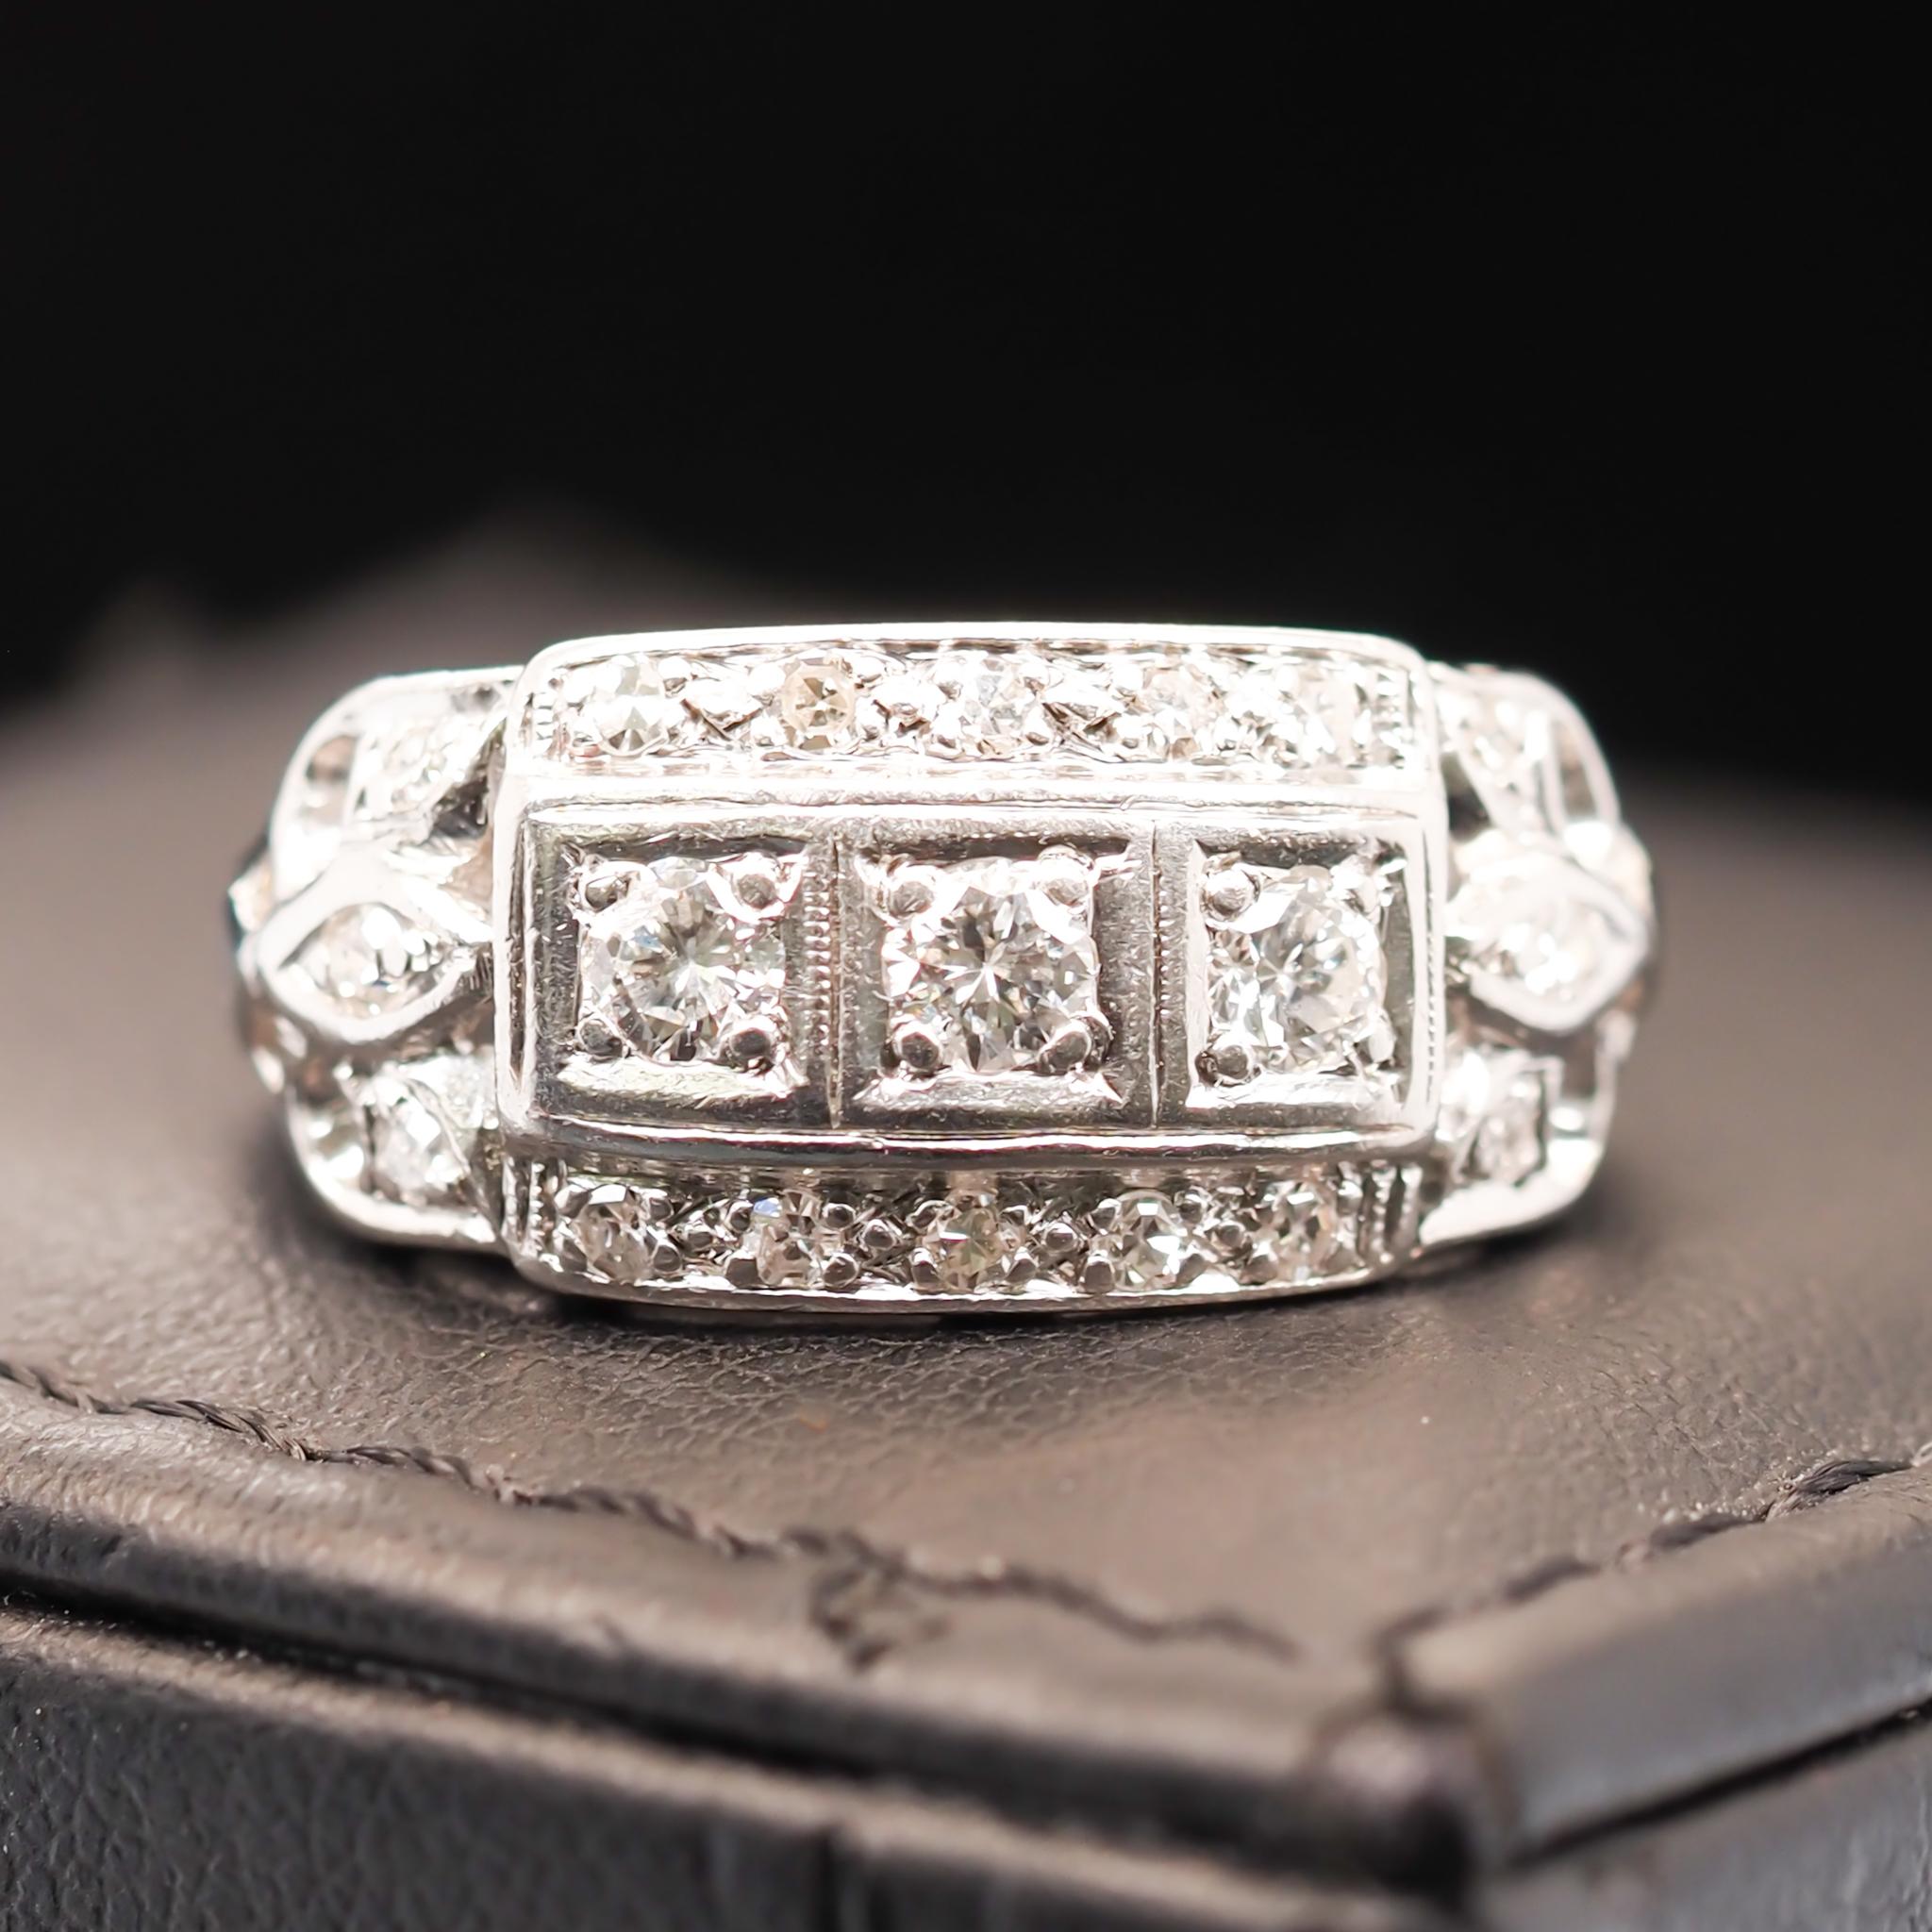 Year: 1940s

Item Details:
Ring Size: 7.75
Metal Type: Platinum [Hallmarked, and Tested]
Weight: 6.6 grams

Diamond Details: .50ct, total weight. G-H Color, VS Clarity, Old European Transitional Cut, natural diamond.

Band Width: 2.50 mm
Condition: